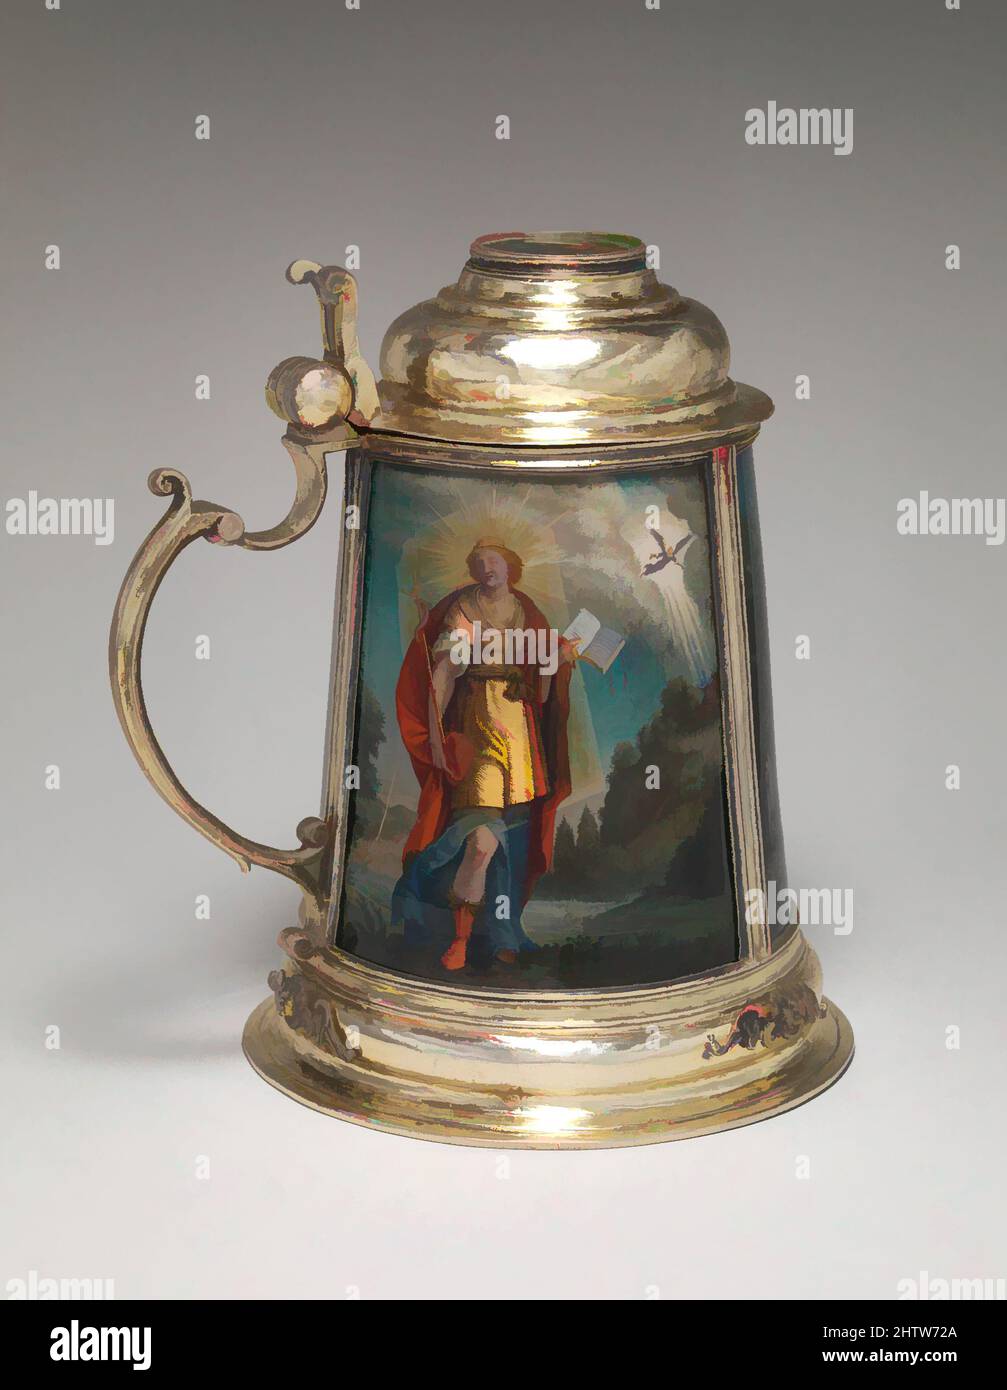 Art inspired by Tankard, 1649, Swiss, Zurich, Silver gilt, verre églomisé, H. 7 1/8 in. (18.1 cm.); W. with handle 6 5/8 in. (16.8 cm); Diam. 5 1/2 in. (14 cm), Metalwork-Silver In Combination, The arms on the lid (Rahn impaling Escher) are those of Hans Heinrich Rahn (1593–1669), who, Classic works modernized by Artotop with a splash of modernity. Shapes, color and value, eye-catching visual impact on art. Emotions through freedom of artworks in a contemporary way. A timeless message pursuing a wildly creative new direction. Artists turning to the digital medium and creating the Artotop NFT Stock Photo